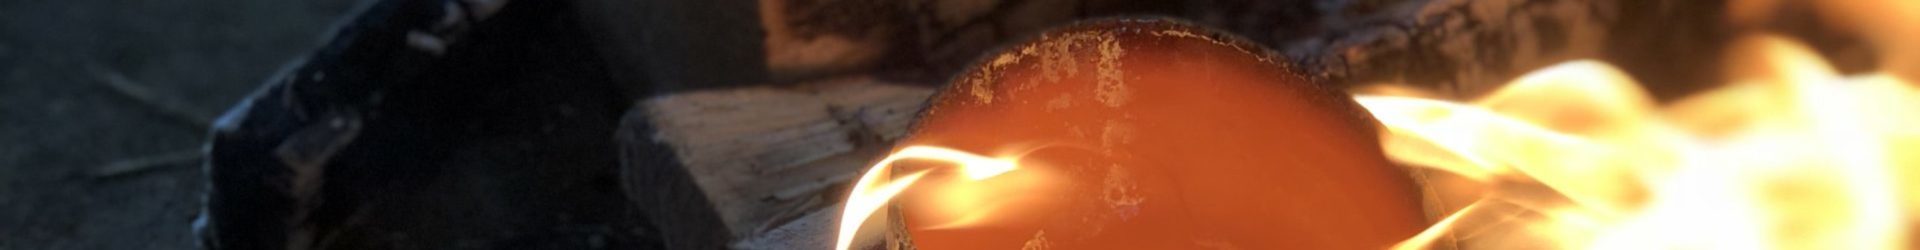 Let’s go back to the campfire: The lesson of mingei